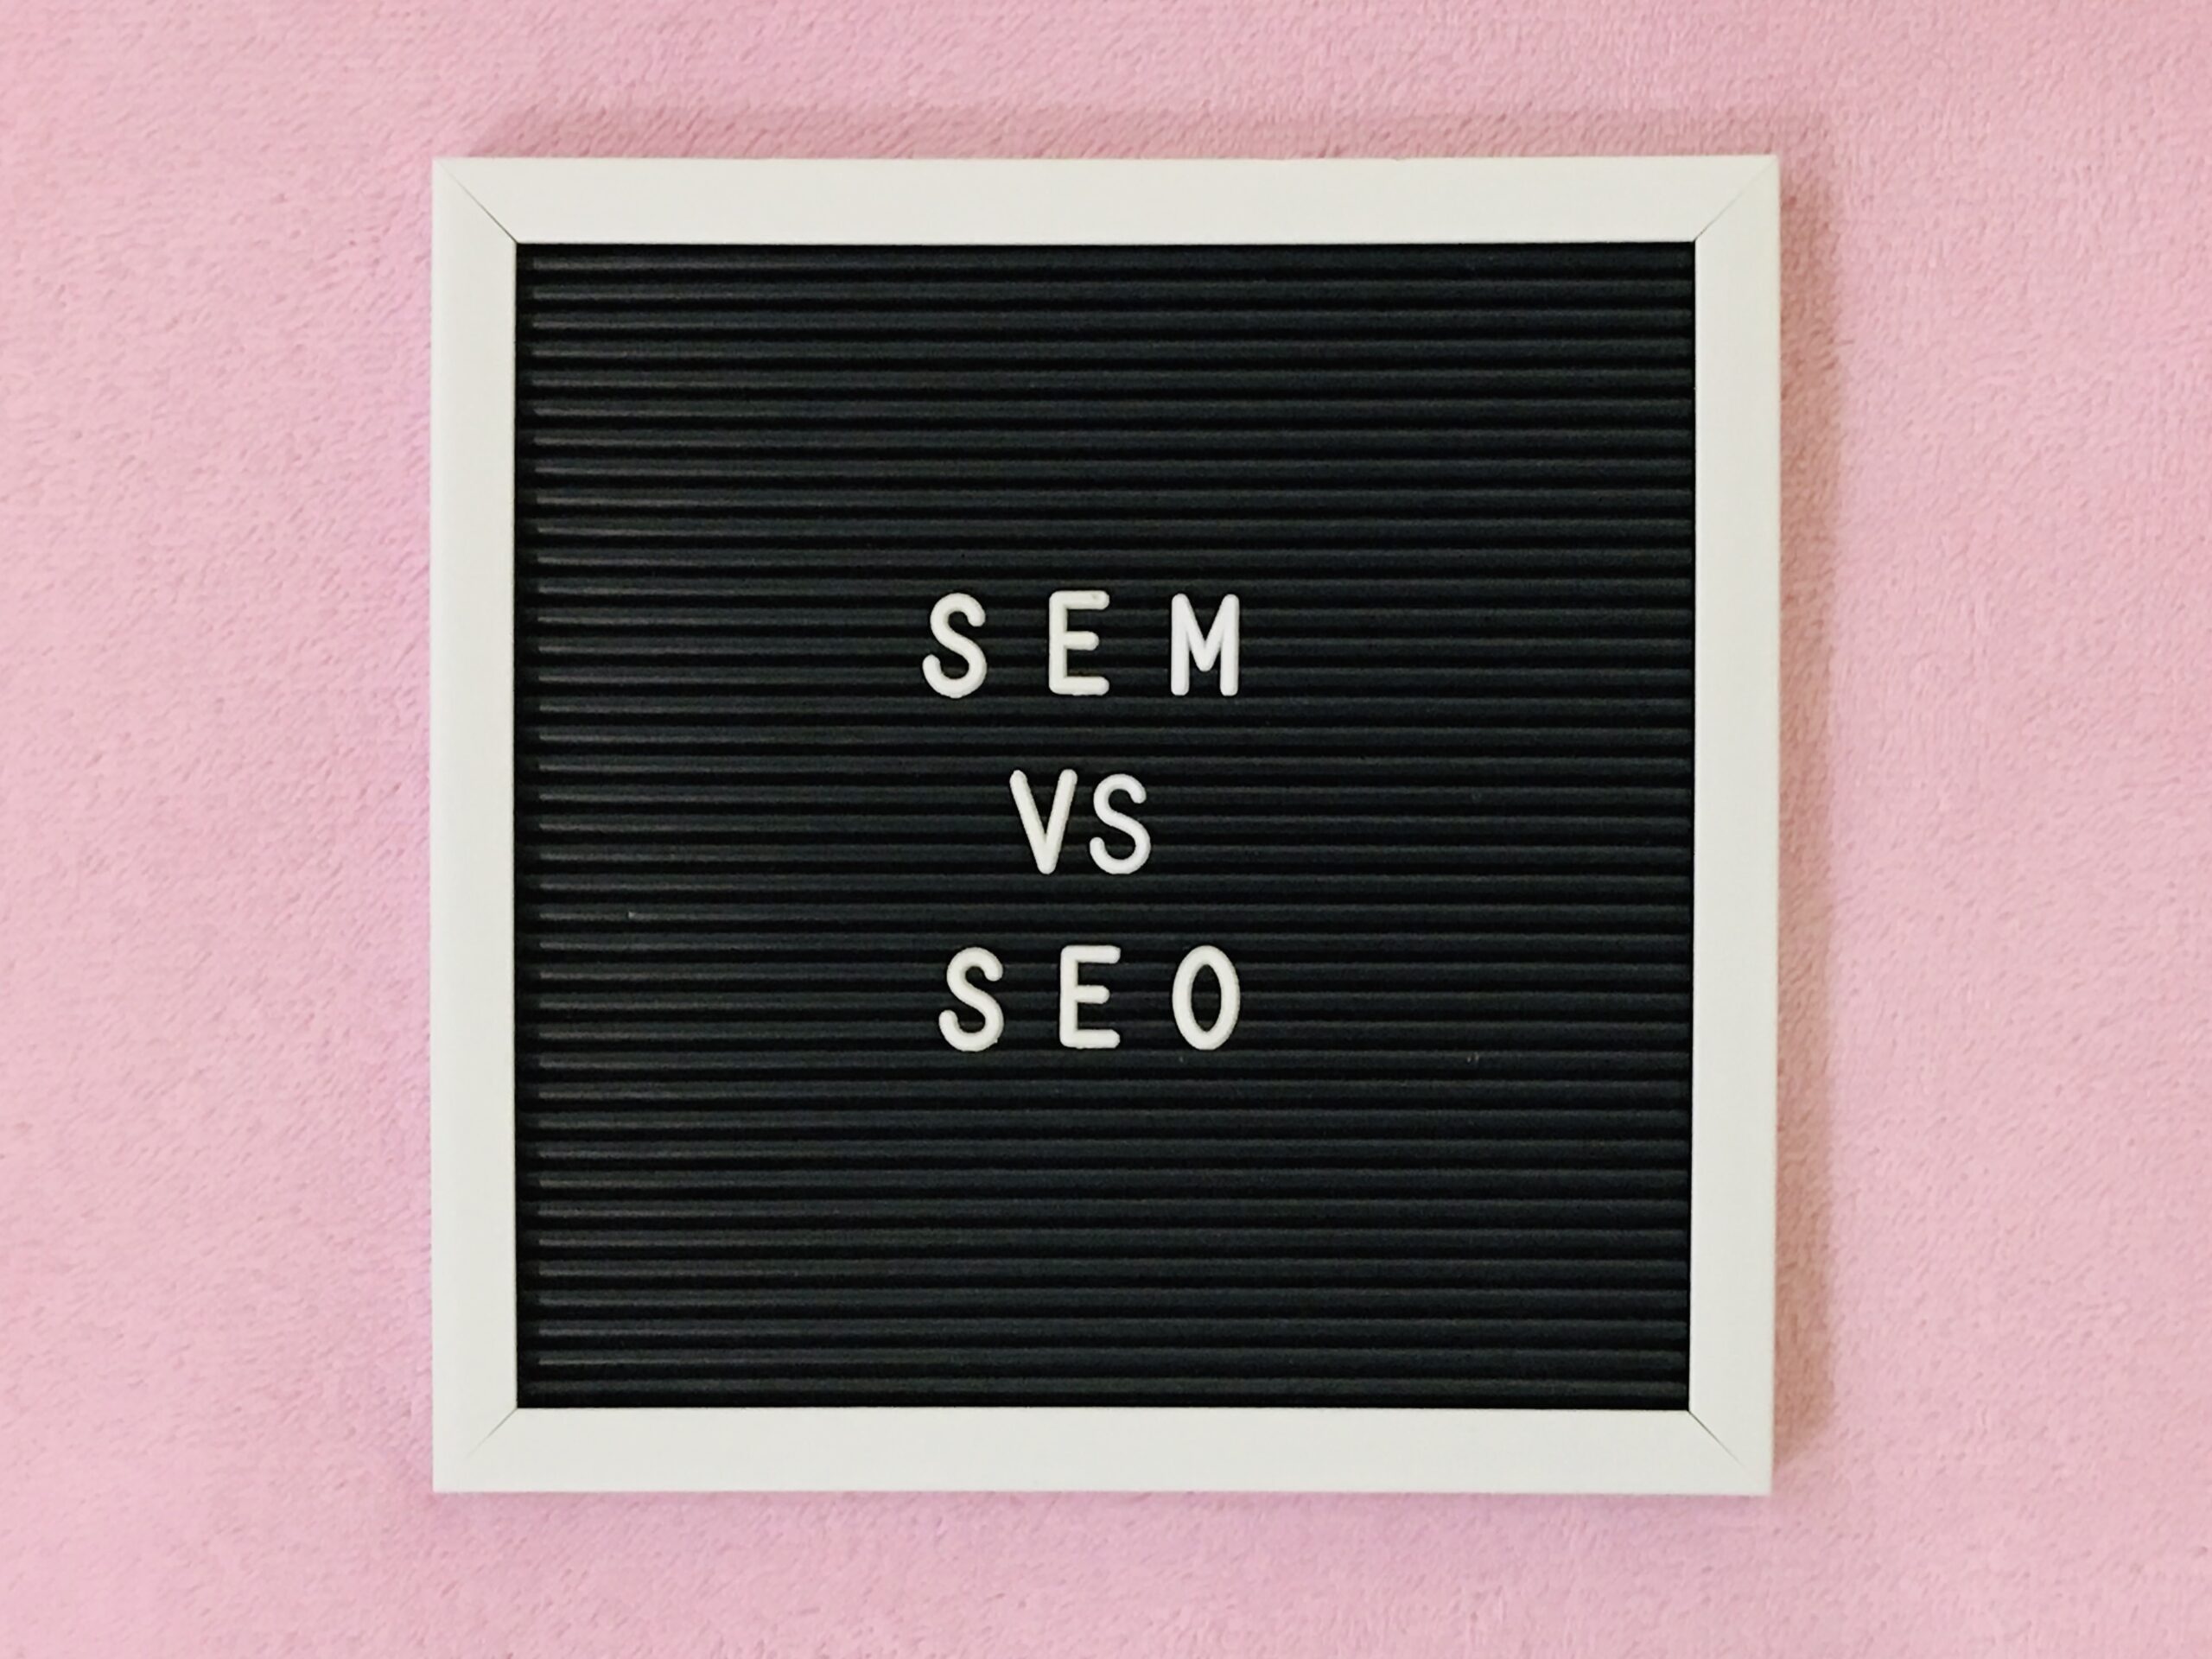 A blackboard has the words "SEM VS SEO" spelled out in white lettering